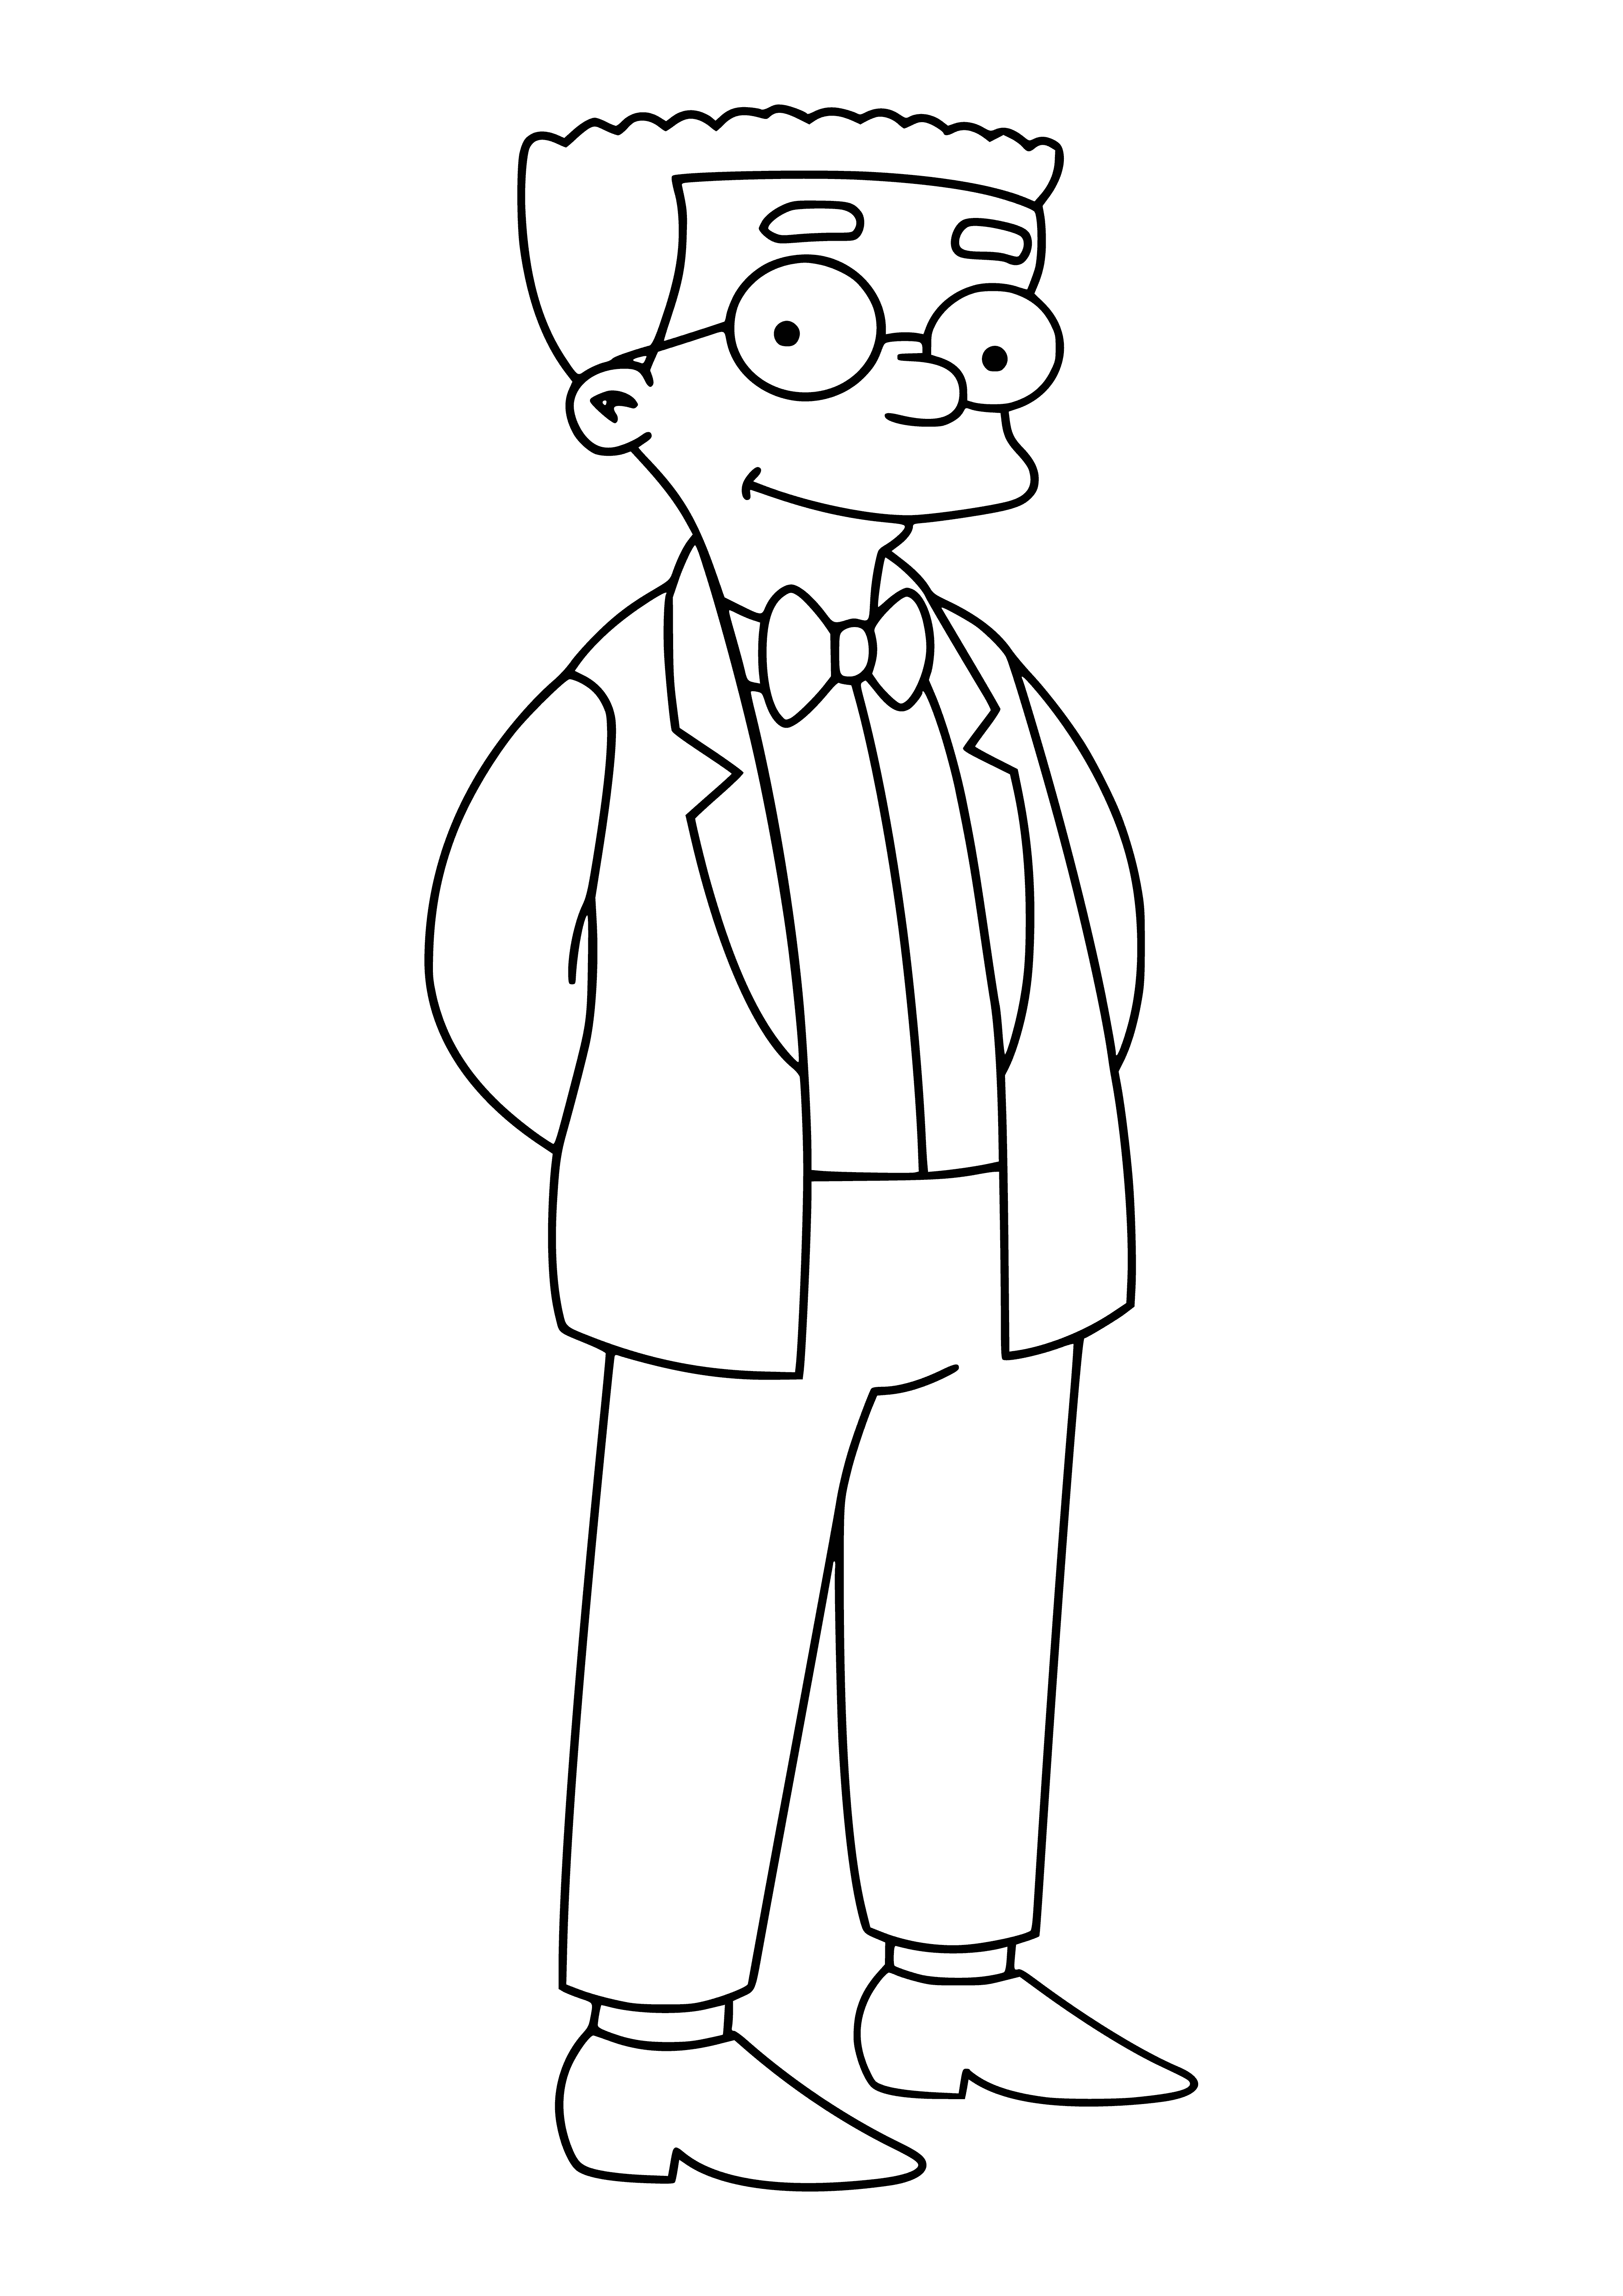 Waylon Smithers coloring page